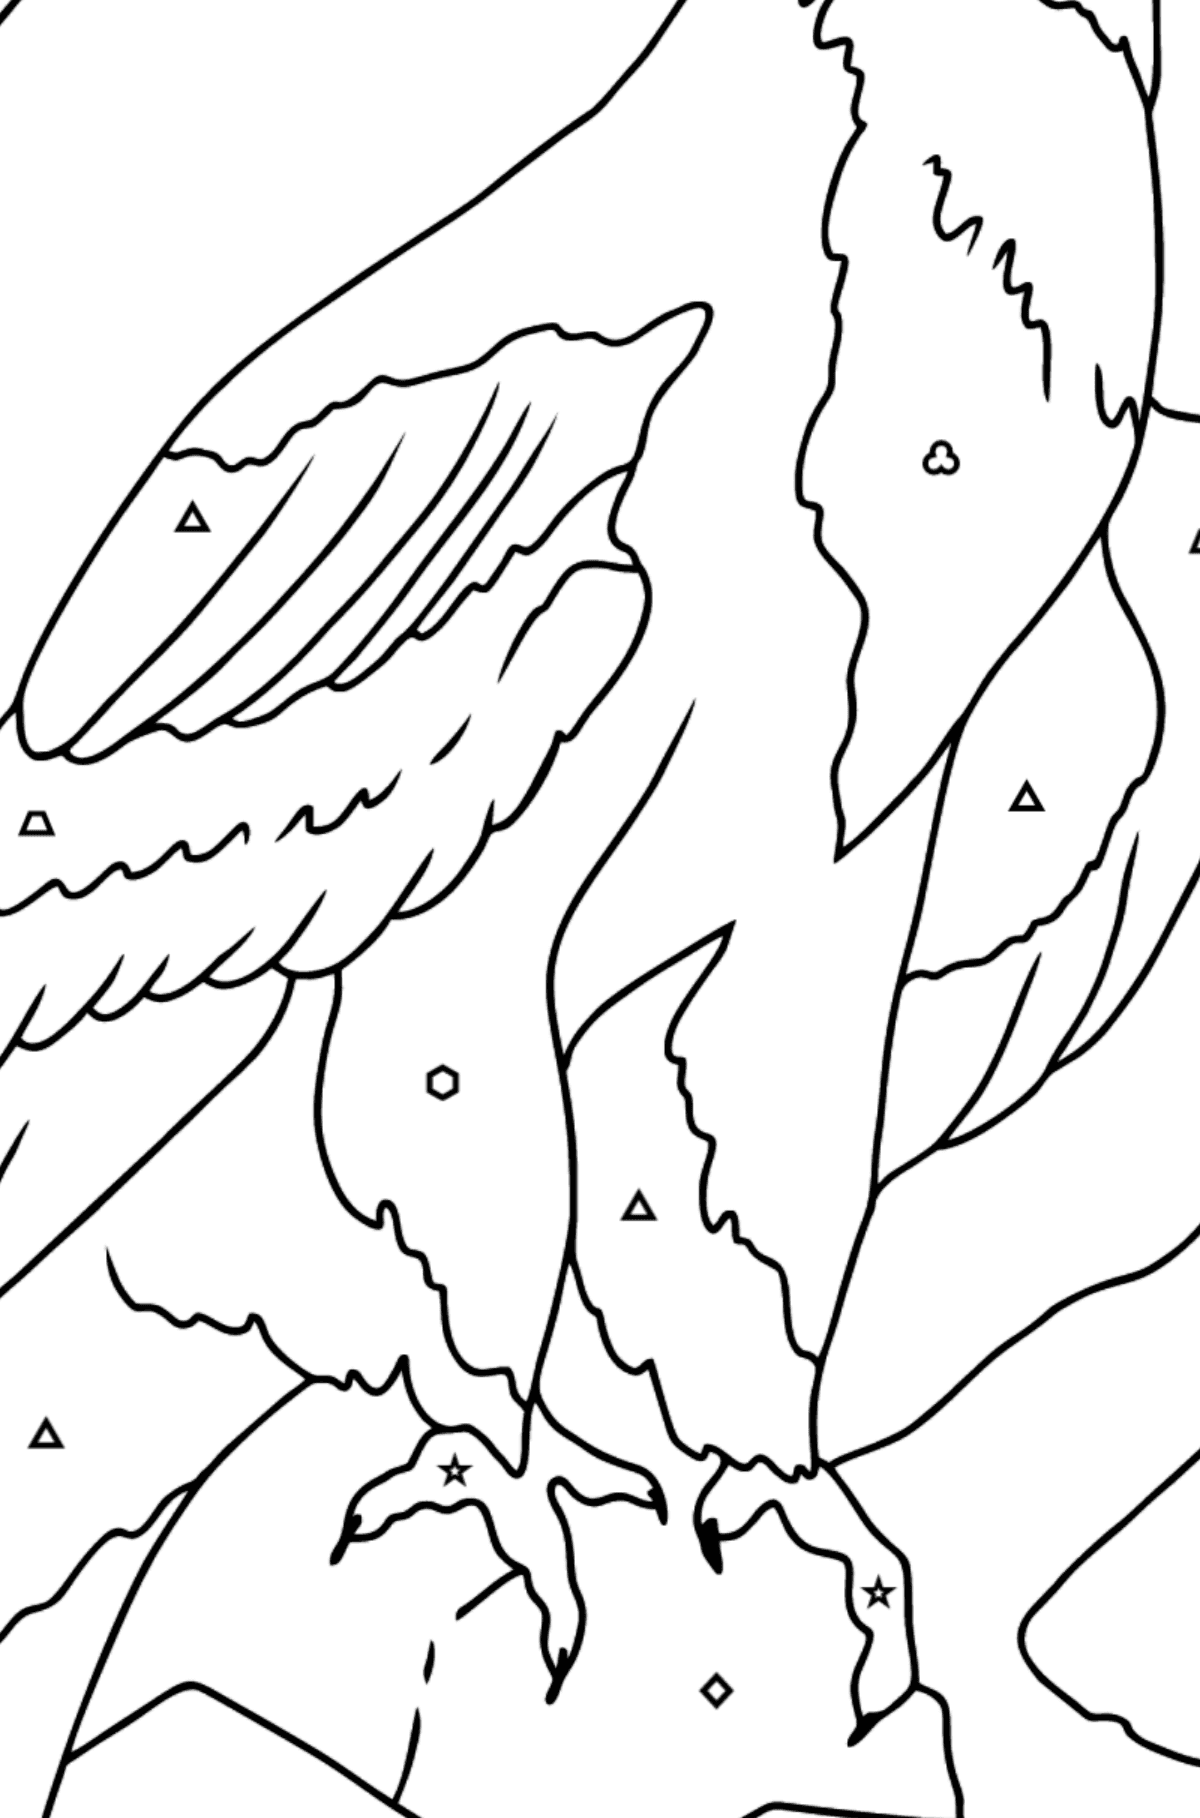 Coloring Page - An Alpine Eagle - Coloring by Geometric Shapes for Kids